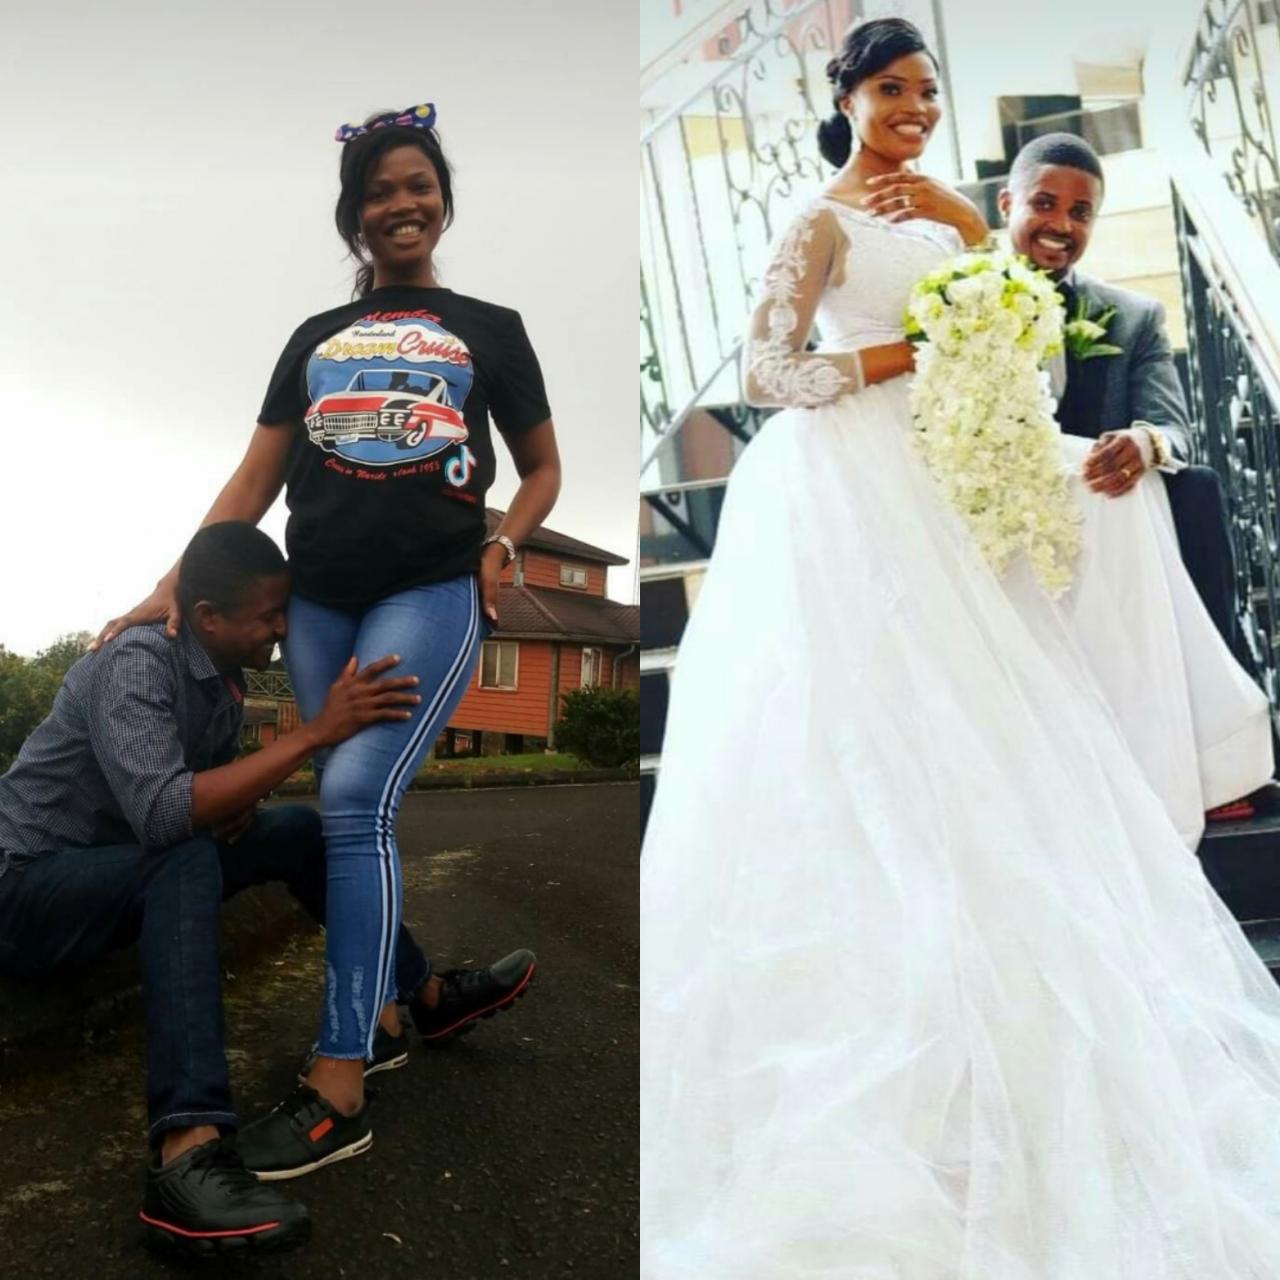 "JAMB lesson teacher turned hubby" Woman writes as she celebrates wedding anniversary with her former teacher